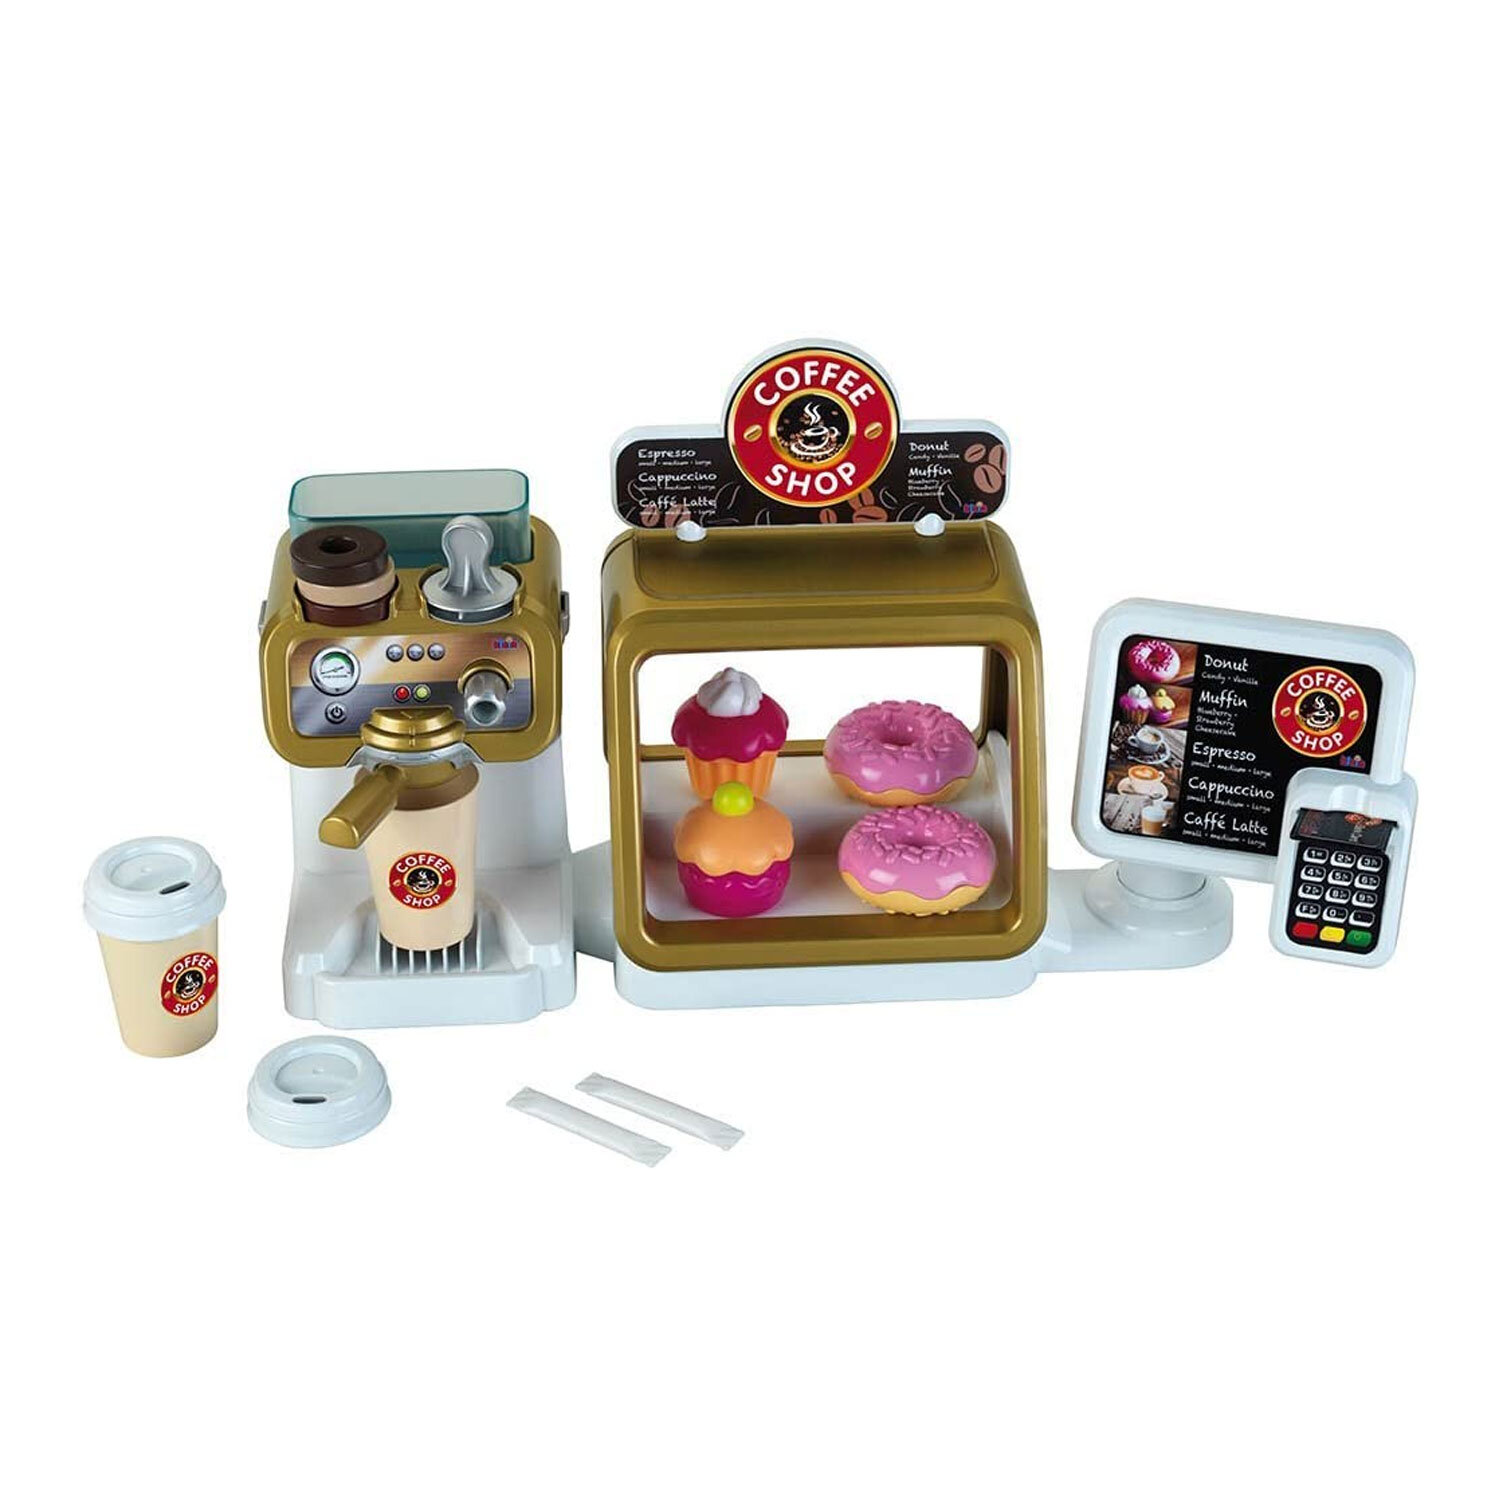 Play-Doh Kitchen Creations Super Colorful Cafe Play Food Coffee